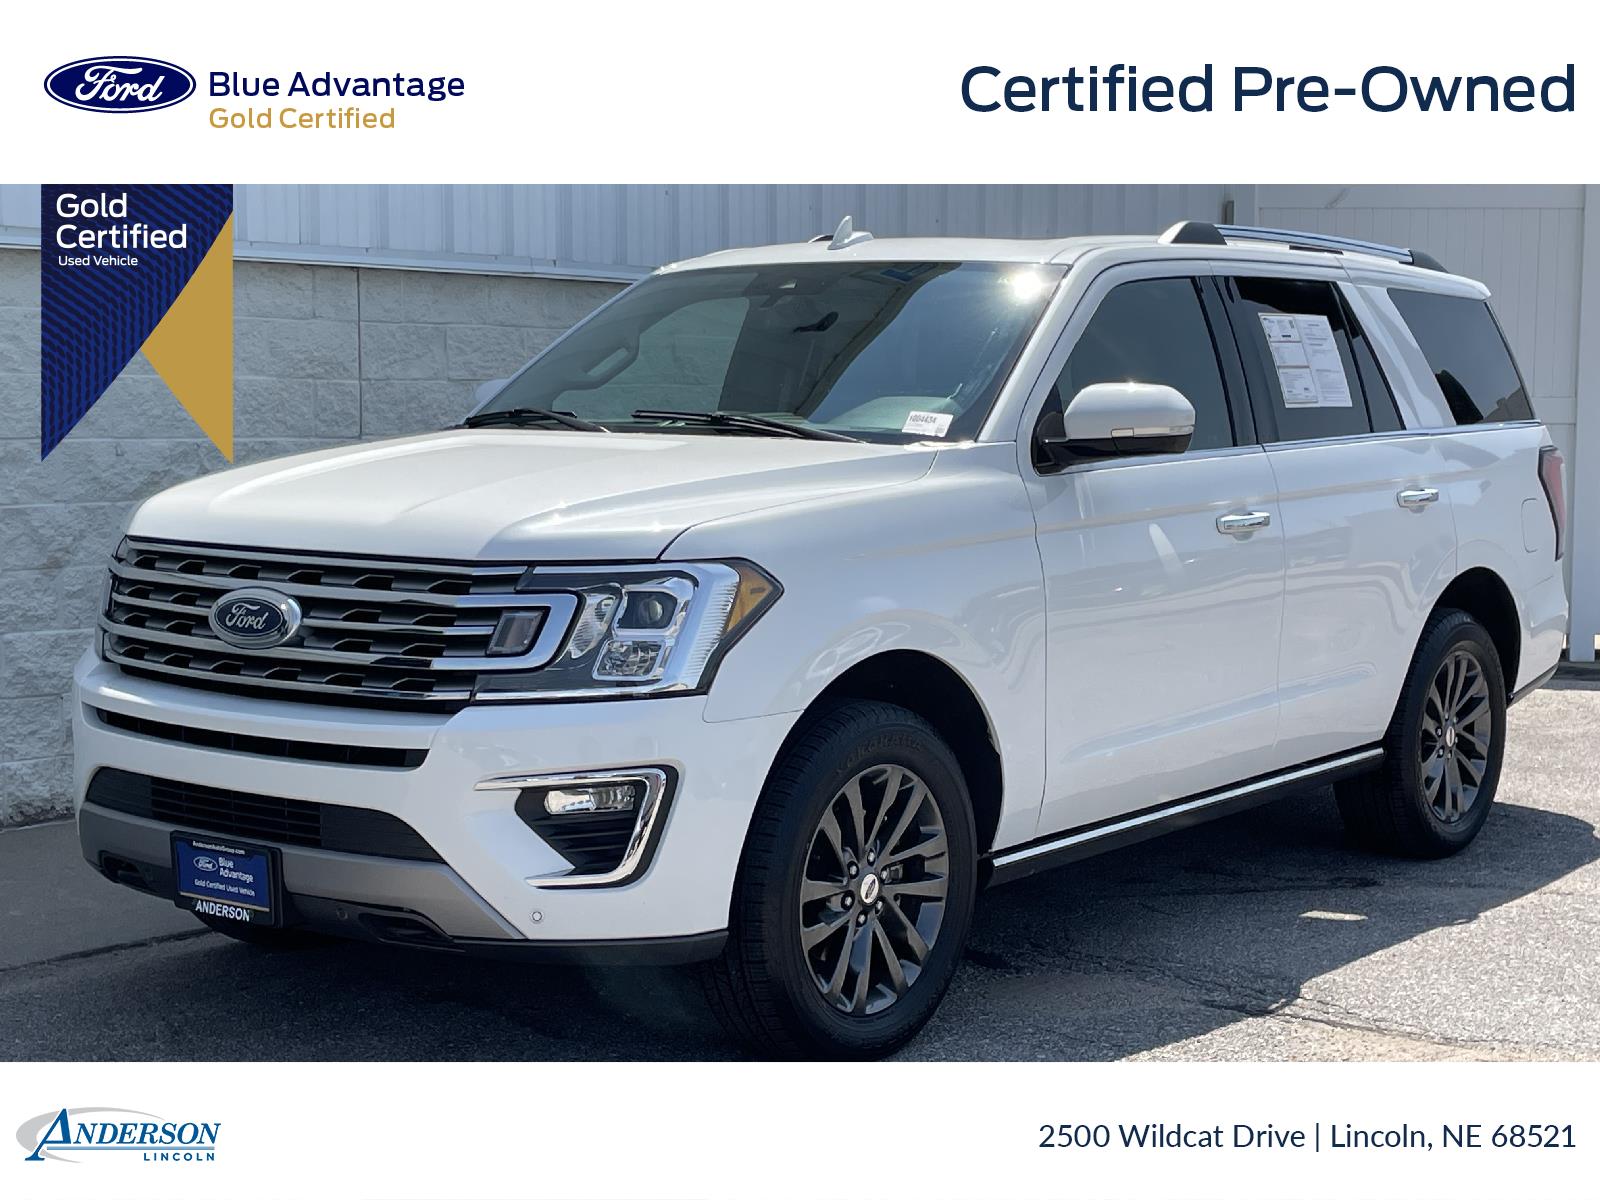 Used 2021 Ford Expedition Limited Stock: 1004434